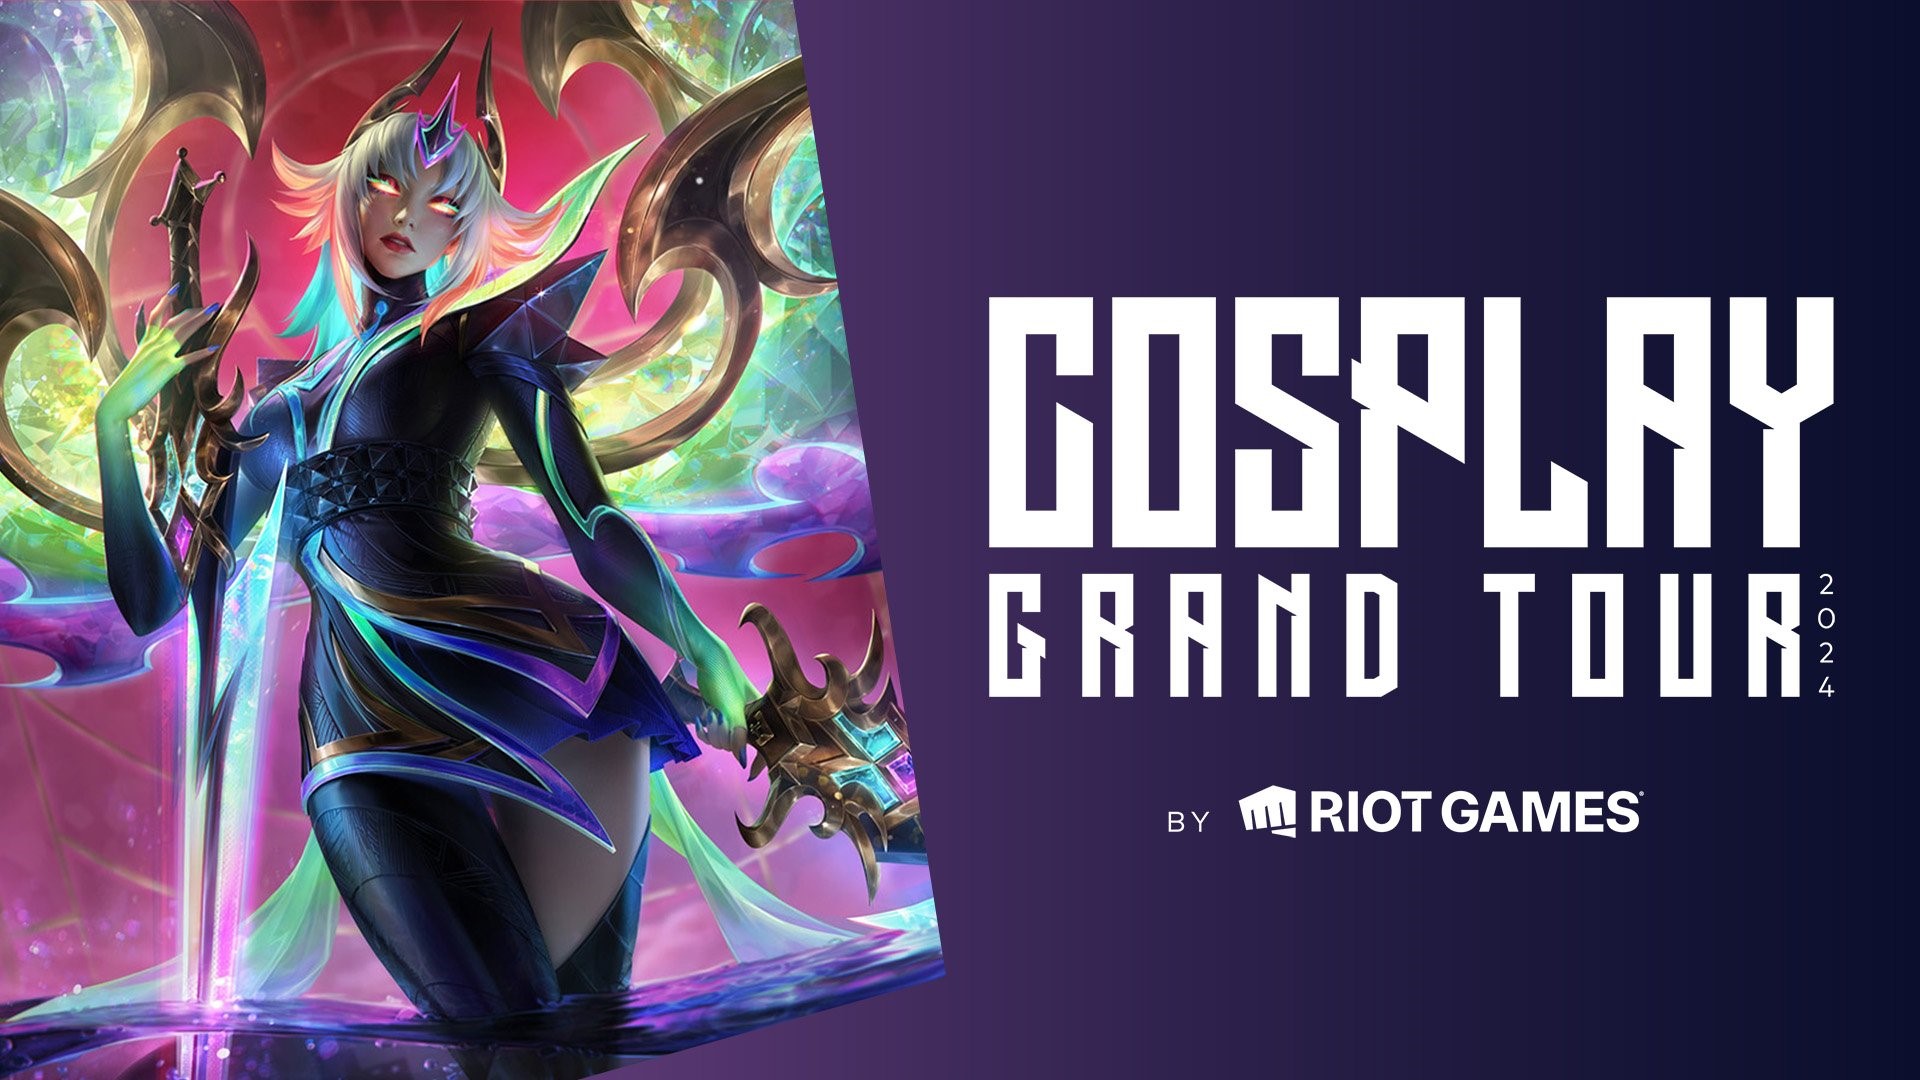 IL Cosplay Grand Tour by Riot Games arriva a Falcomics